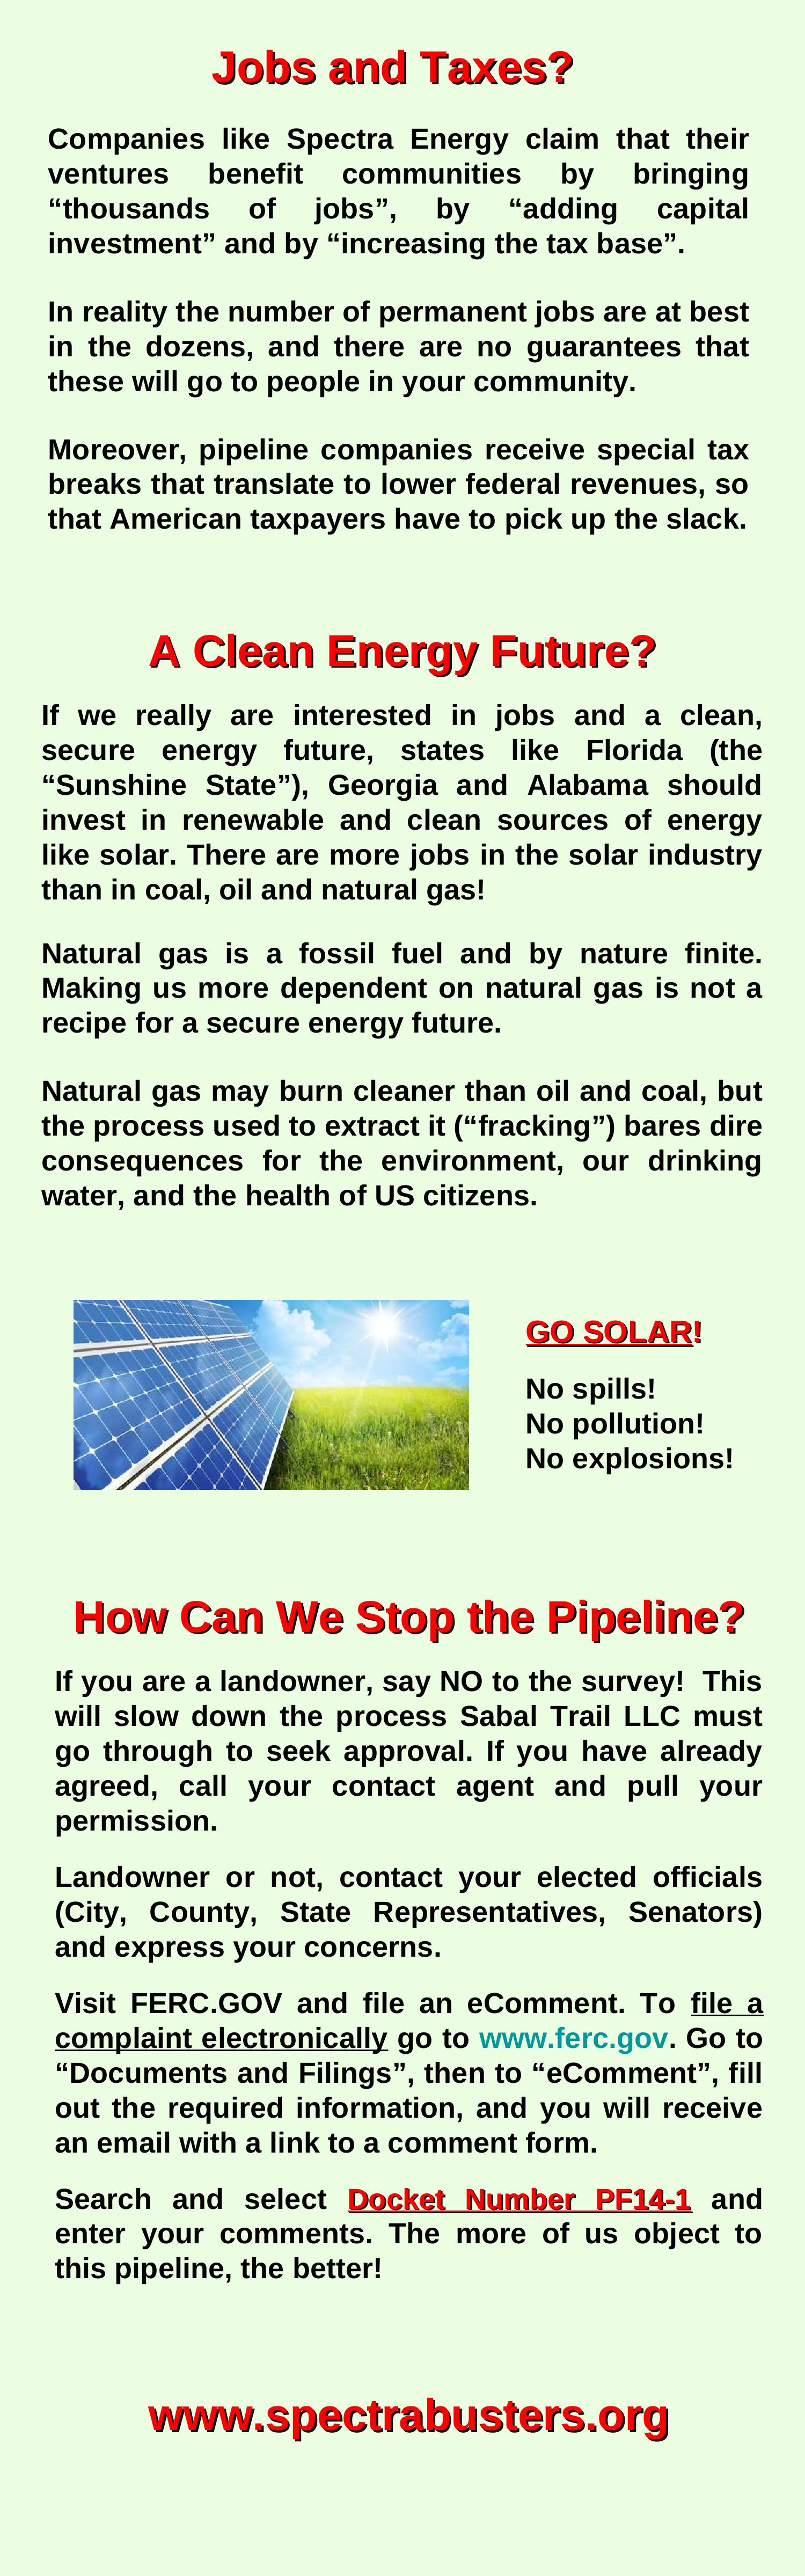 1500x4800 SabalXTrailXsideXpanelX2-001, in SpectraBusters poster about Sabal Trail fracked methane pipeline, by Michael G. Noll, for SpectraBusters.org